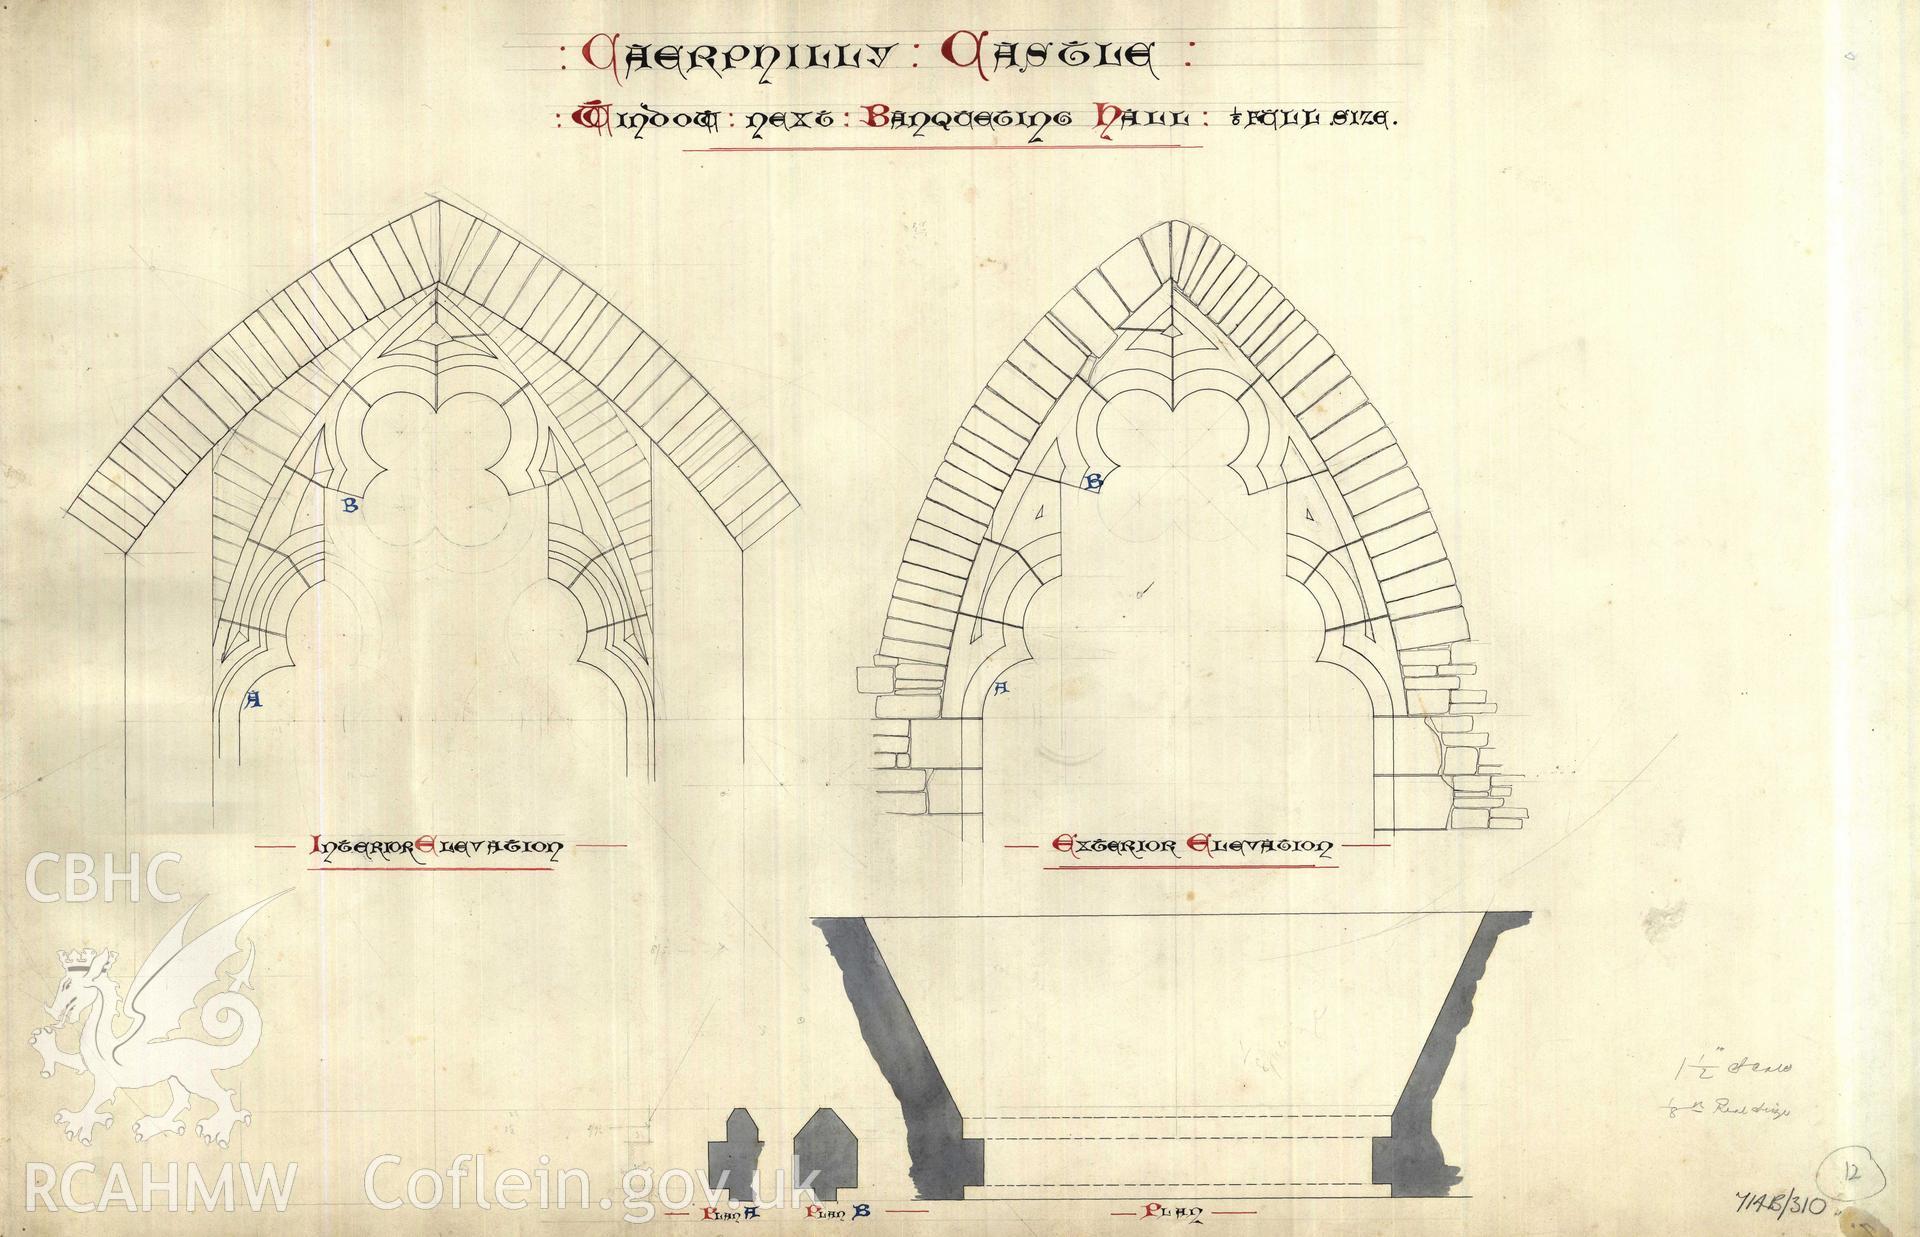 Cadw guardianship monument drawing of Caerphilly Castle. Solar window details. Cadw Ref. No:714B/310. Scale 1:8.